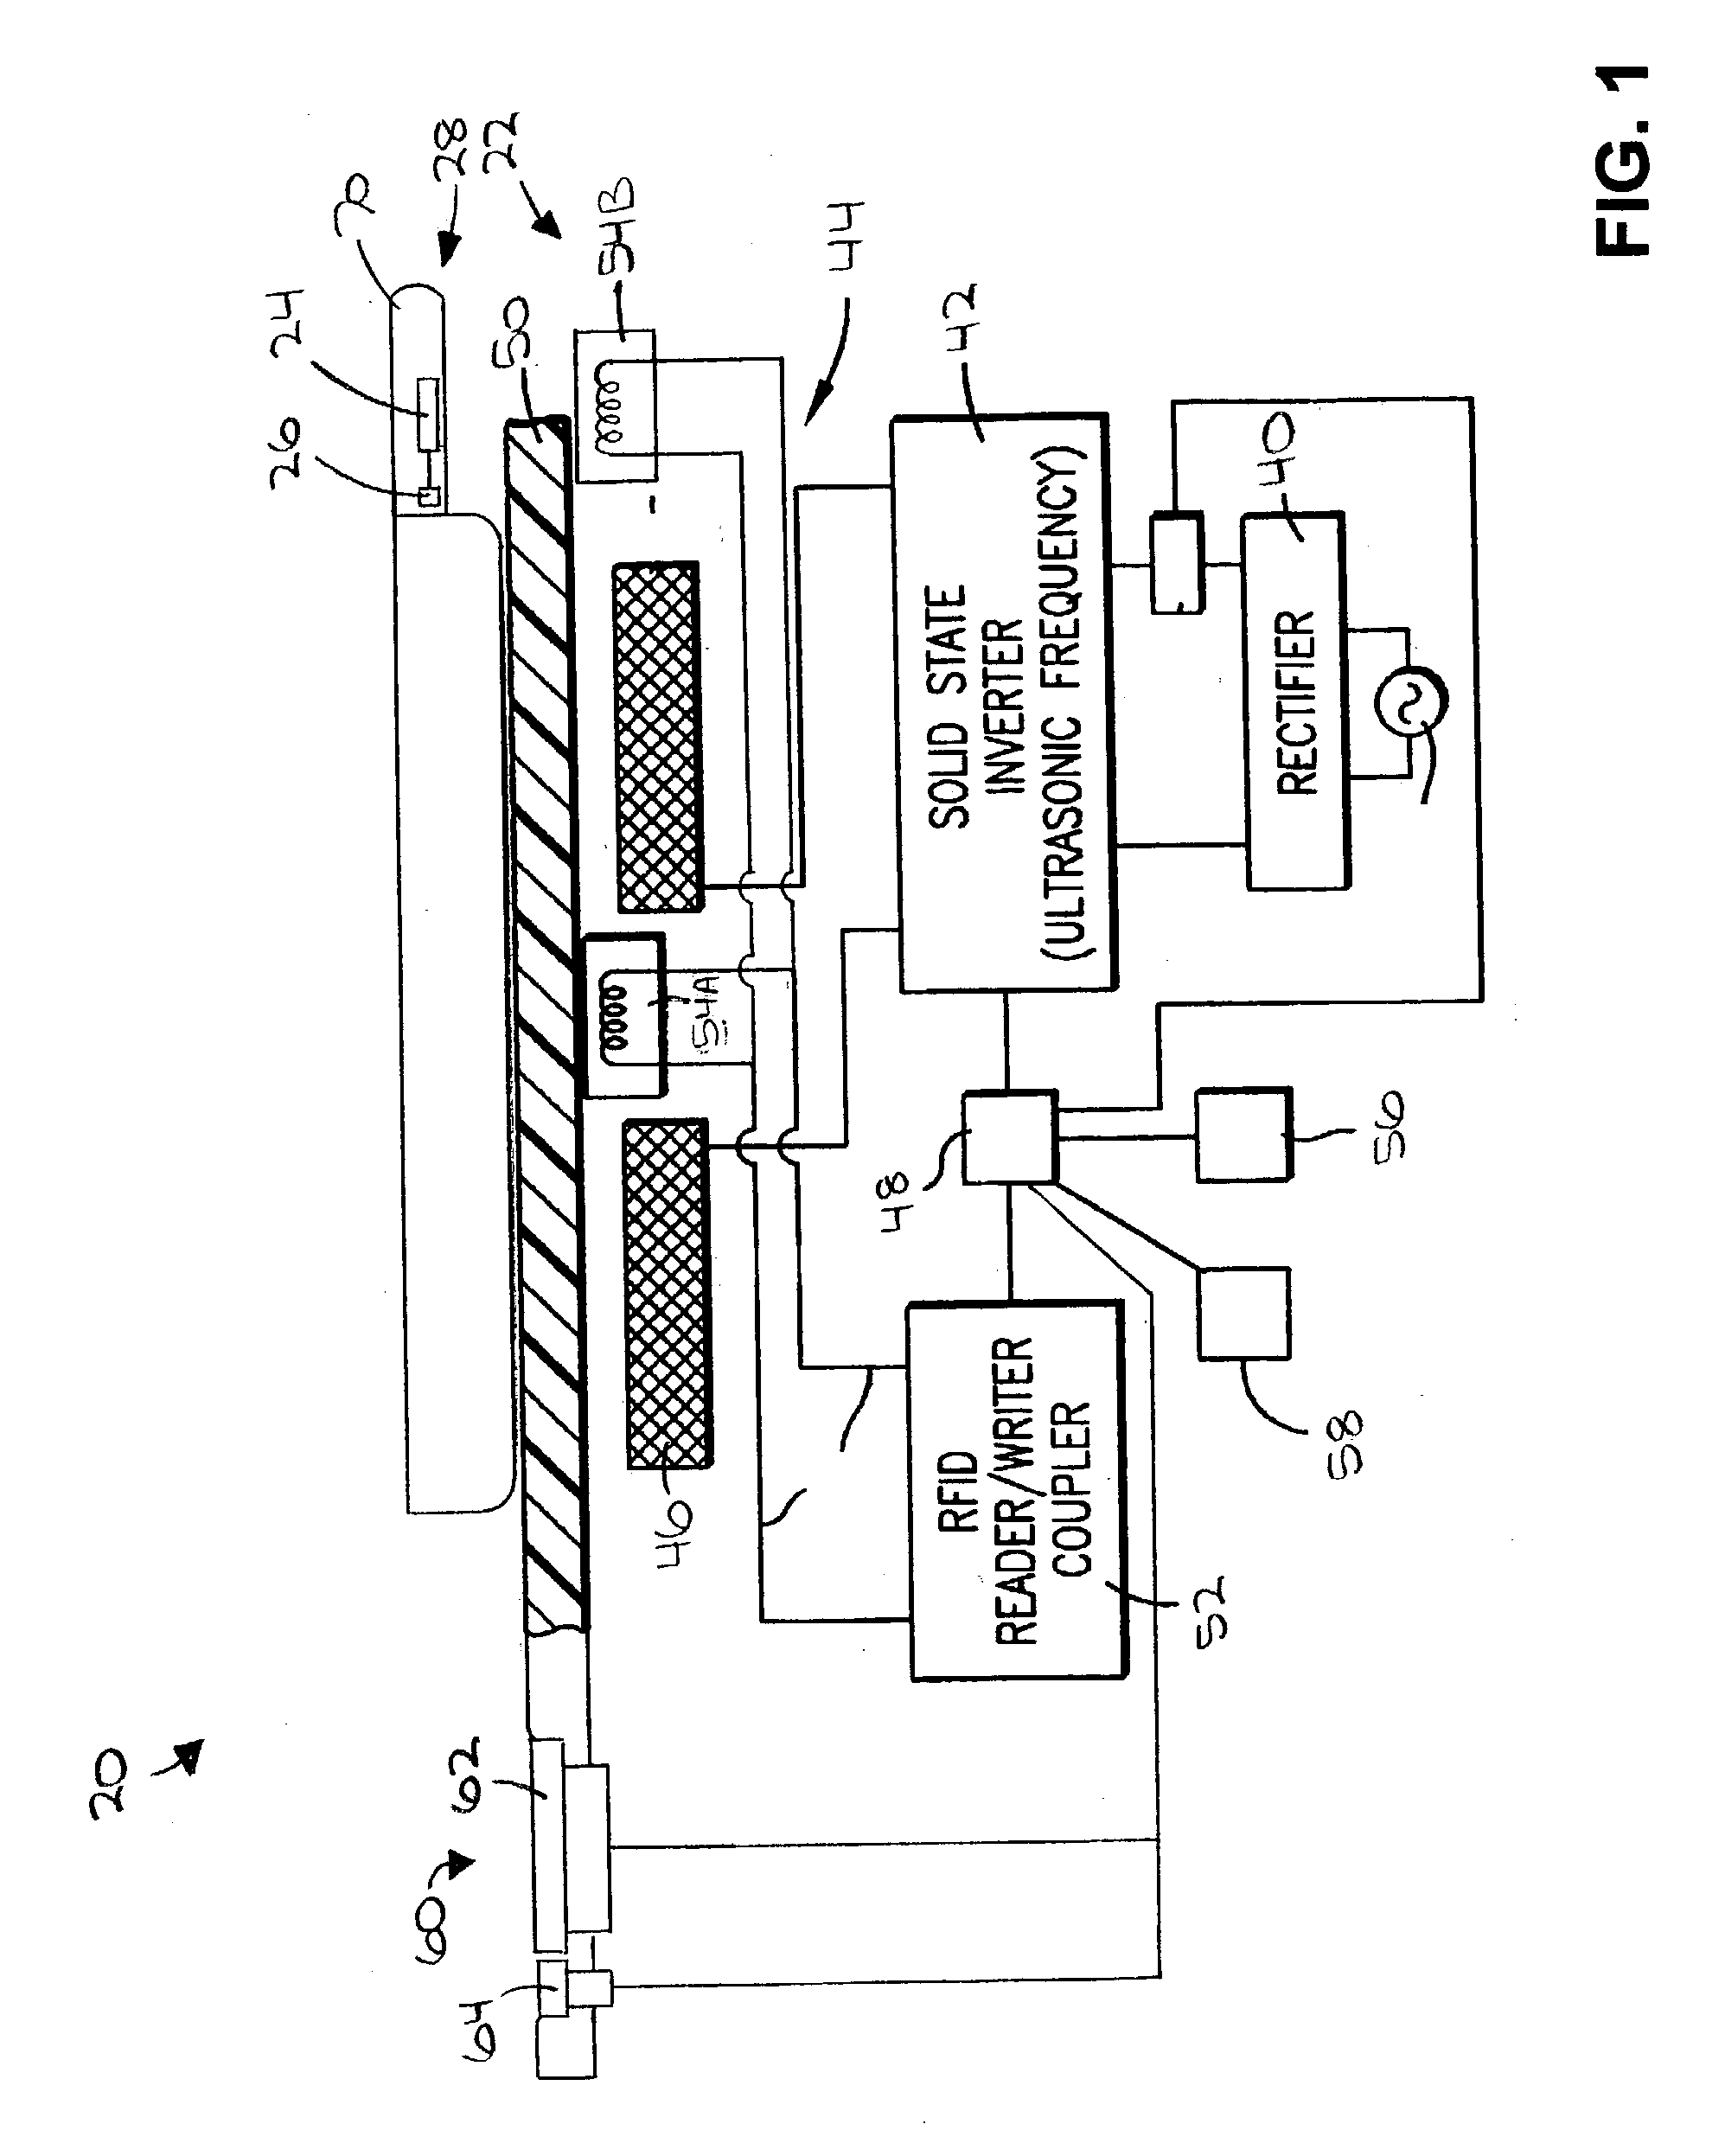 RFID-controlled smart induction range and method of cooking and heating